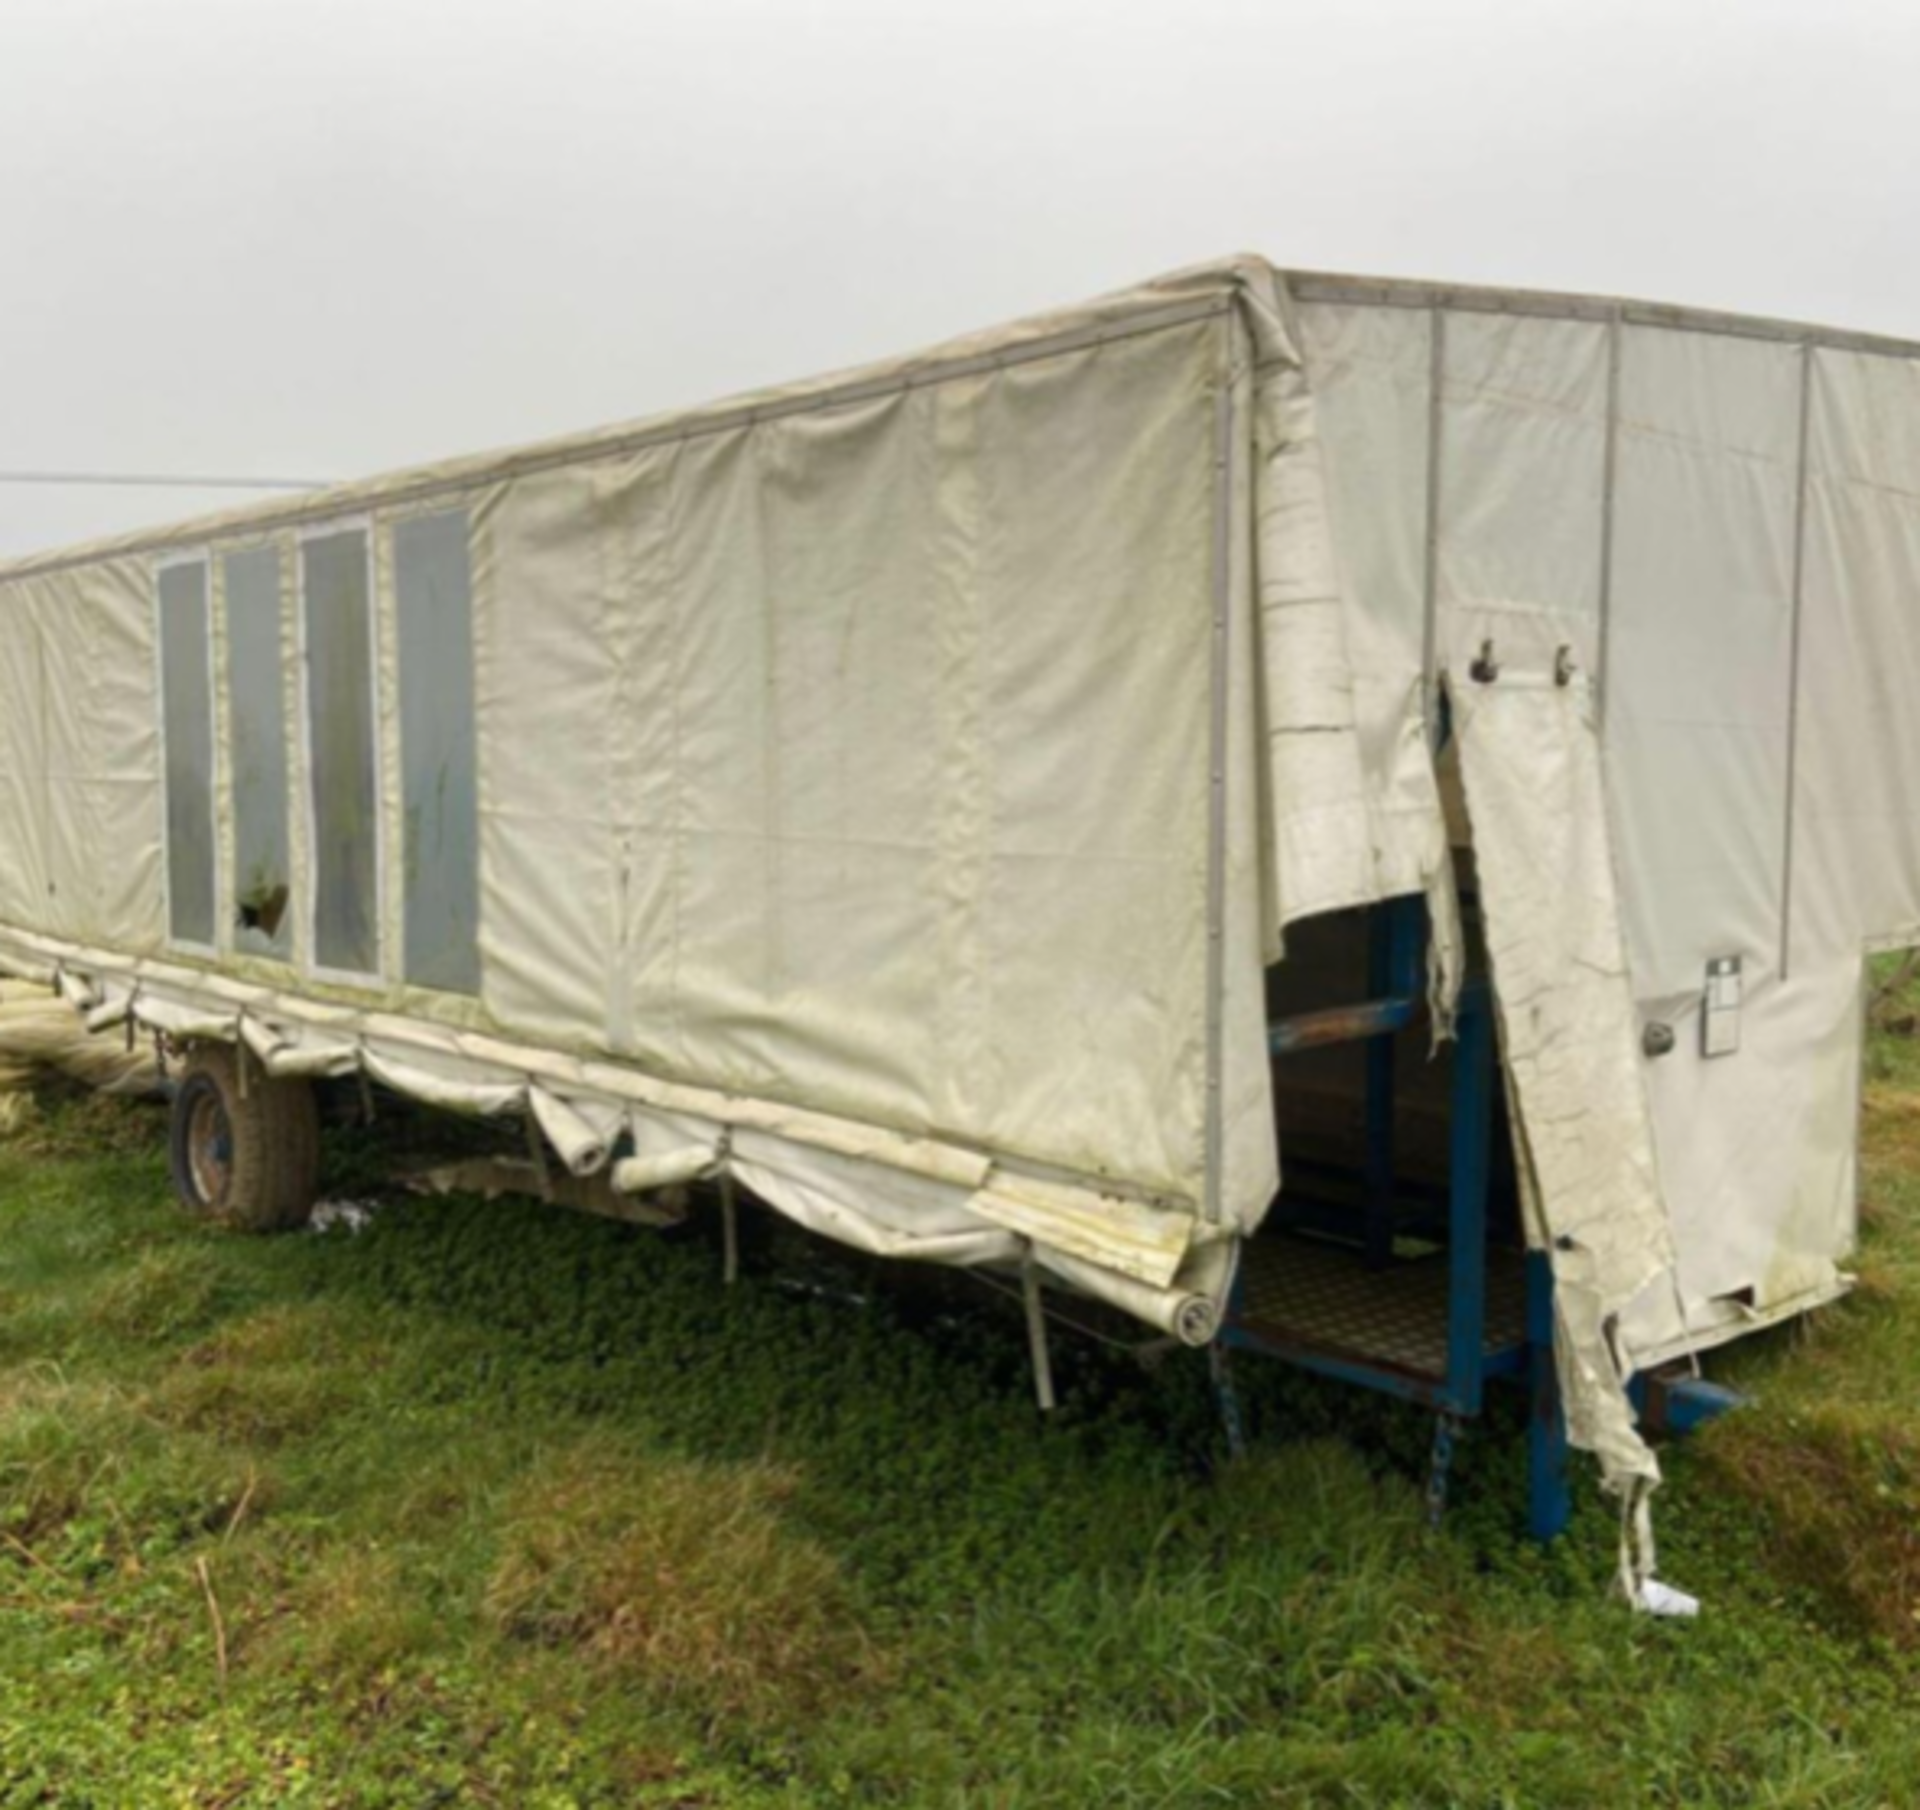 VHS curtain side slewing washing cart, year 2006. Stored near Goring Heath, Reading. - Image 2 of 4